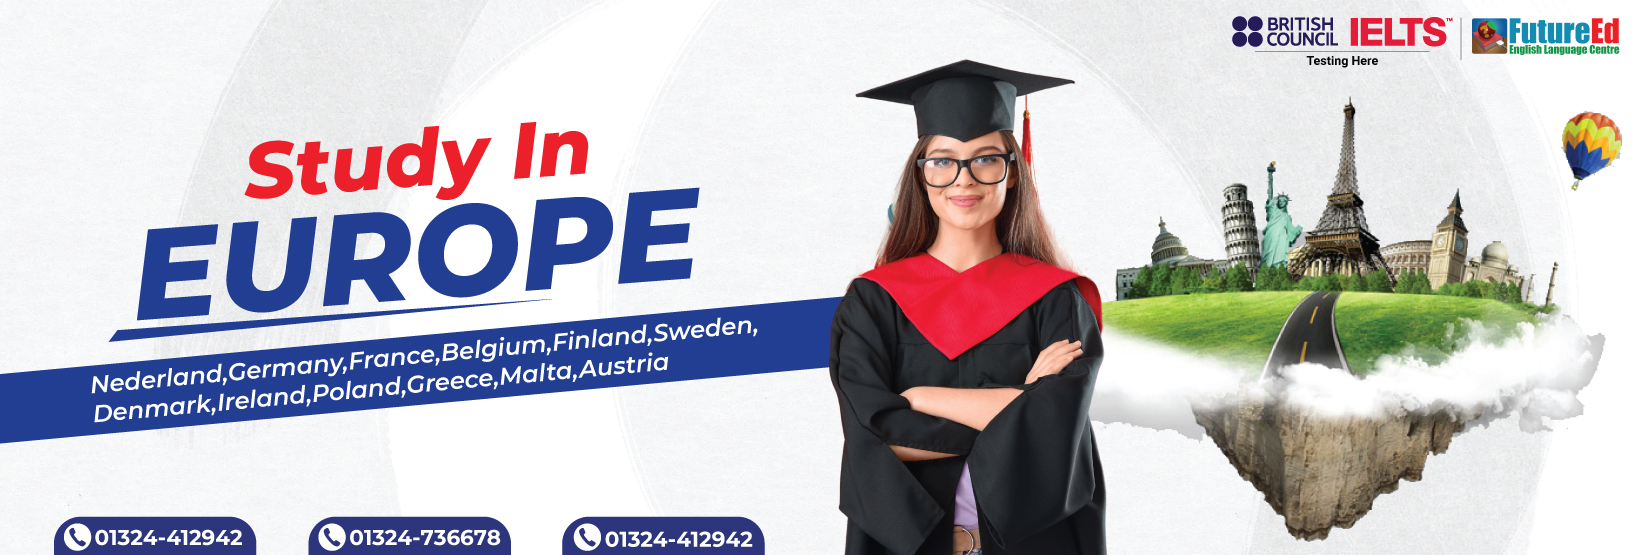 Study in europe